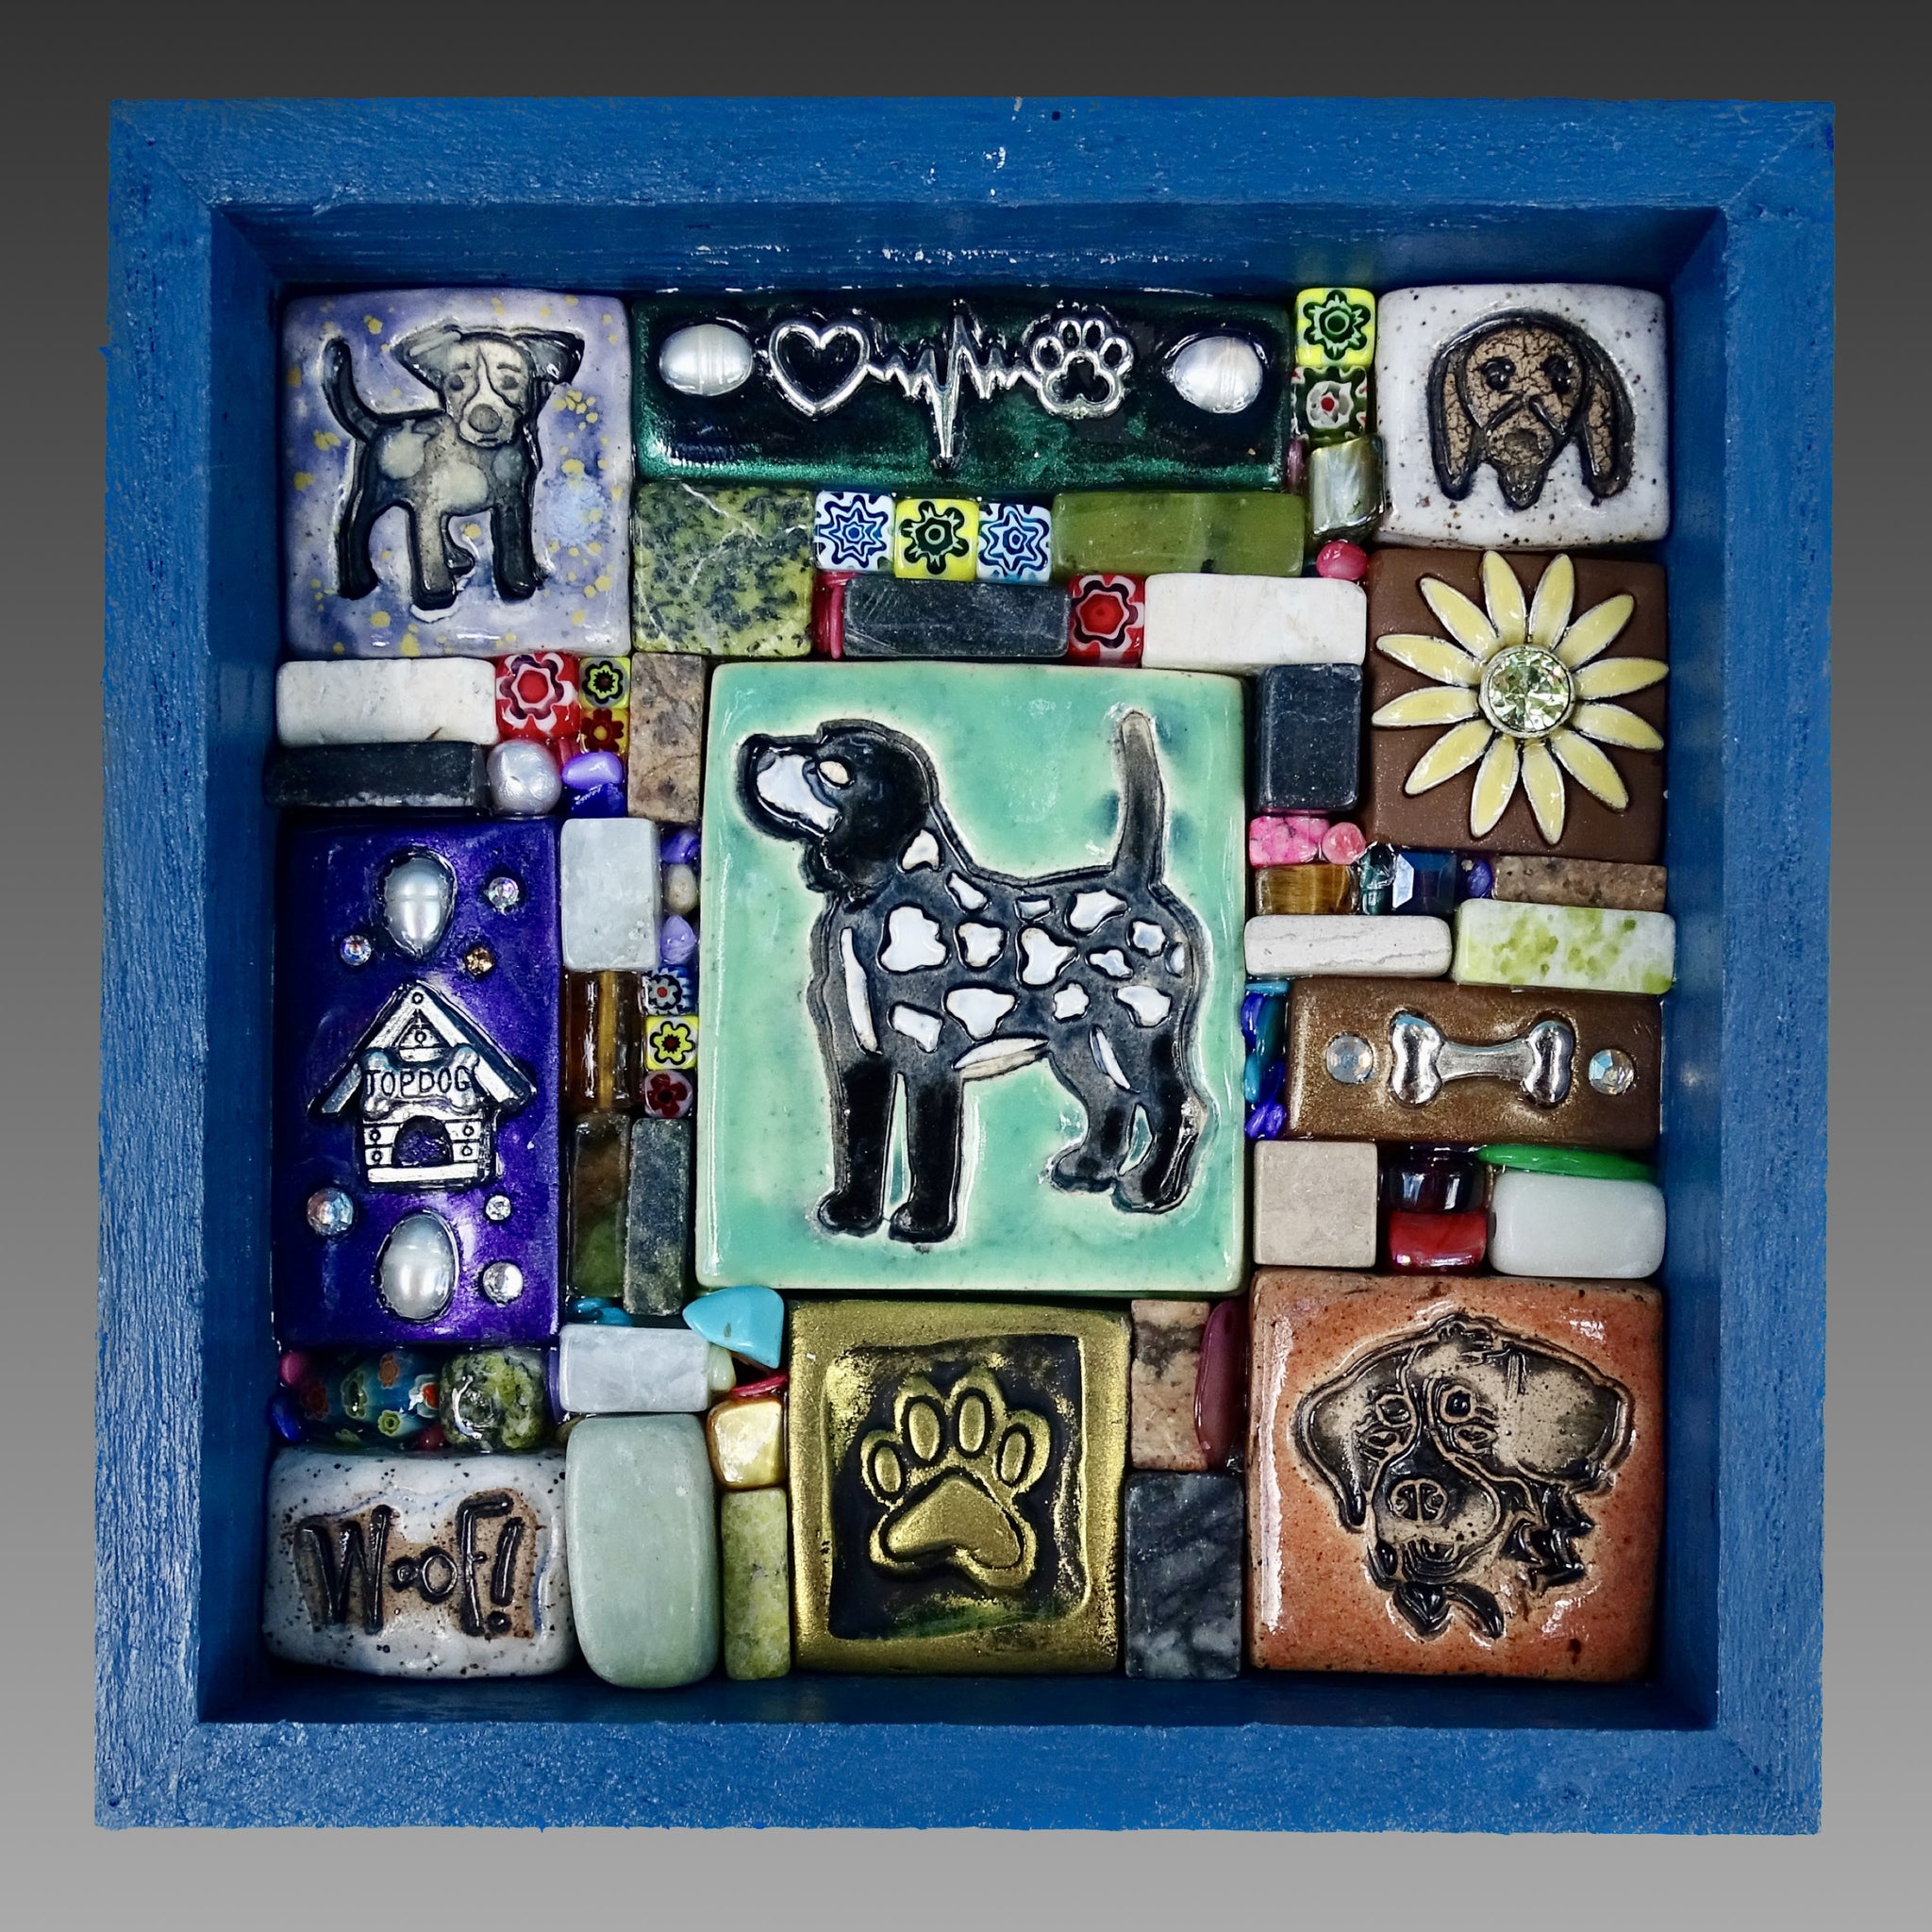 Clay mosaic artwork, art with dog theme. Puppy, hound dog, animals, pet, pawprint, flowers, woof, doghouse, unique handmade gift idea for dog lover or pet parent